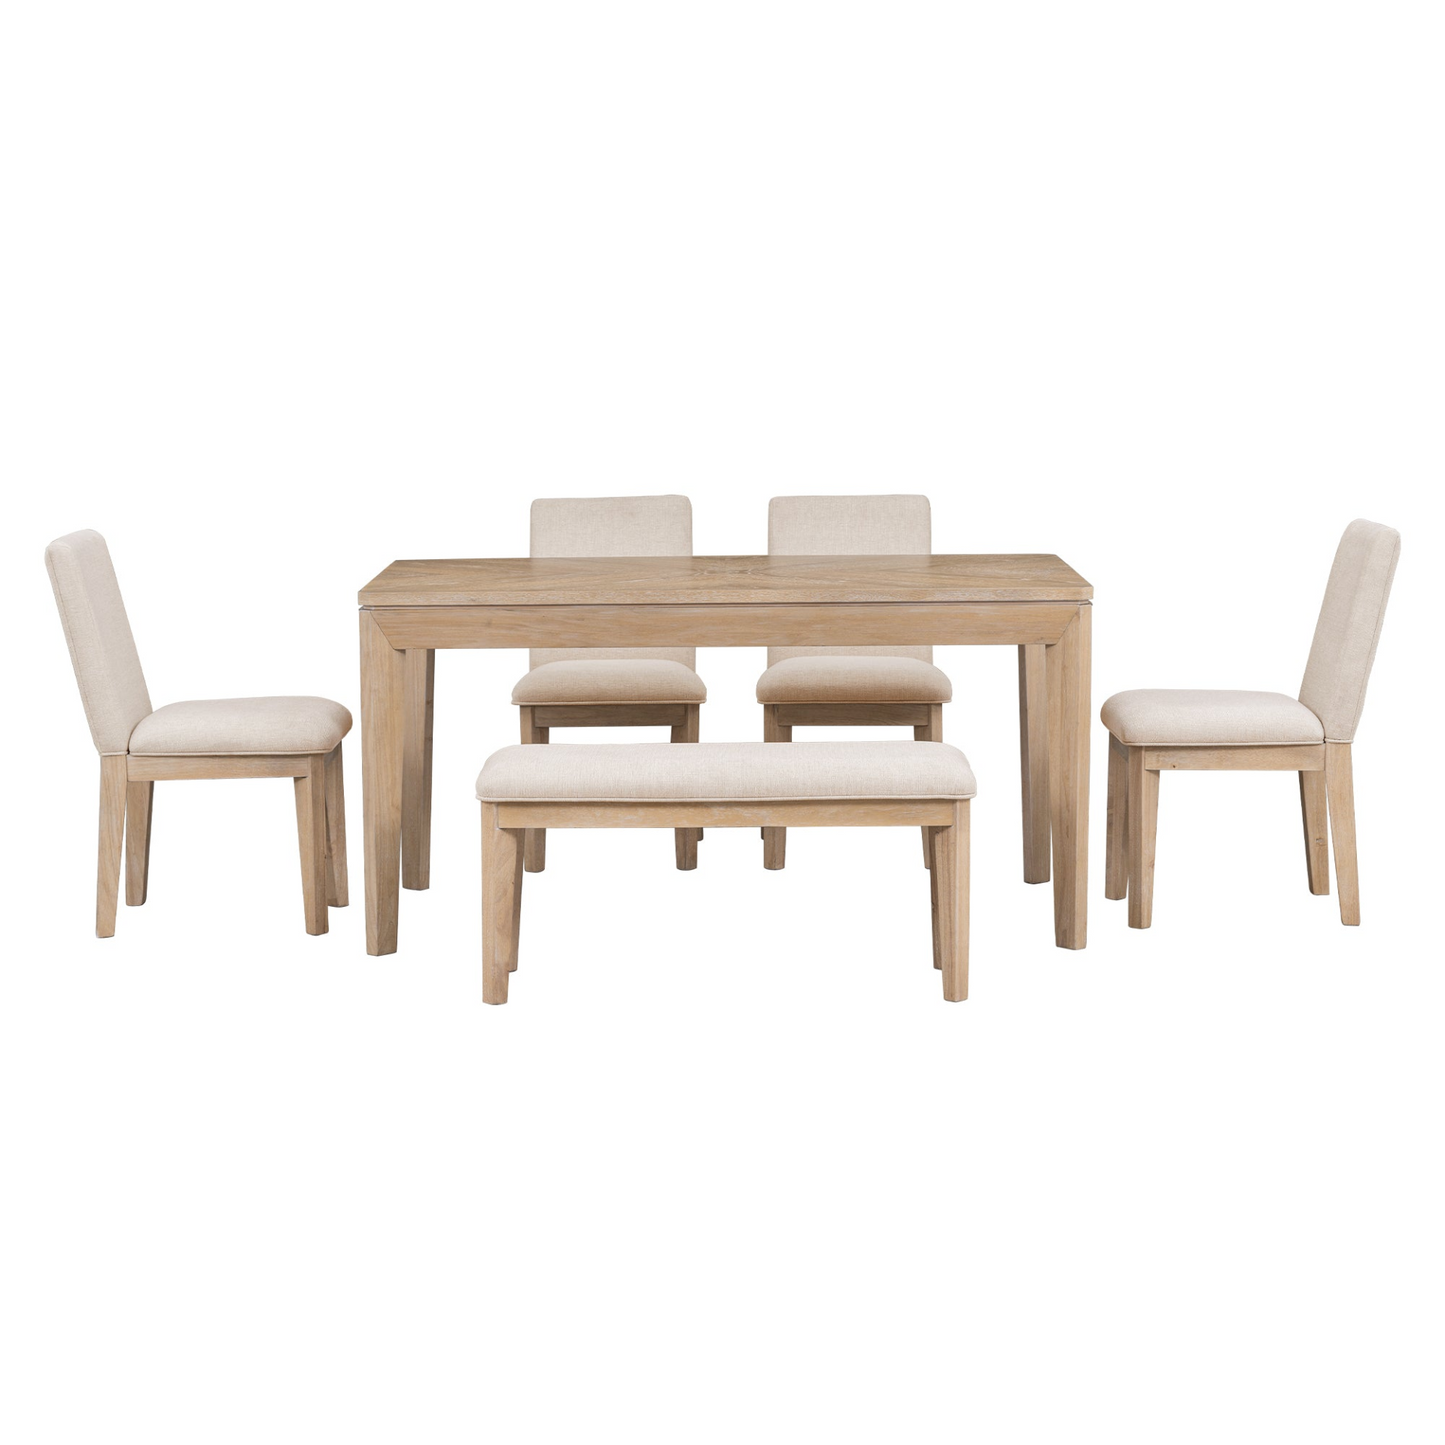 6-Piece Dining Table Set with Upholstered Dining Chairs and Bench,Farmhouse Style, Tapered Legs, Natural+Beige Môdern Space Gallery